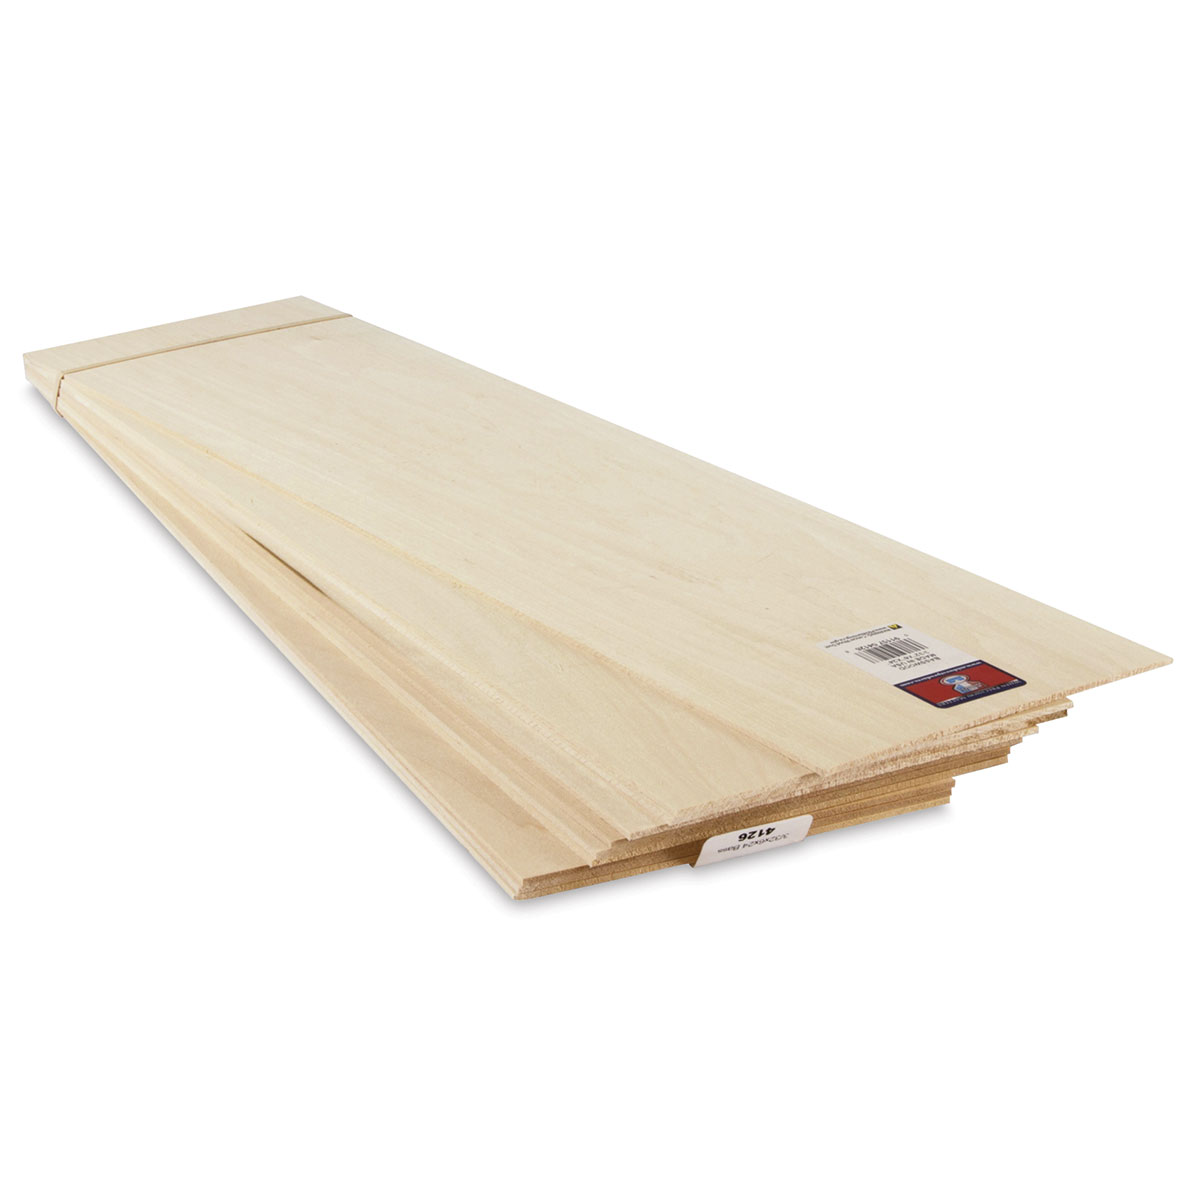 Midwest Products 4406 1/4 x 4 x 24 Basswood Sheet – Trainz